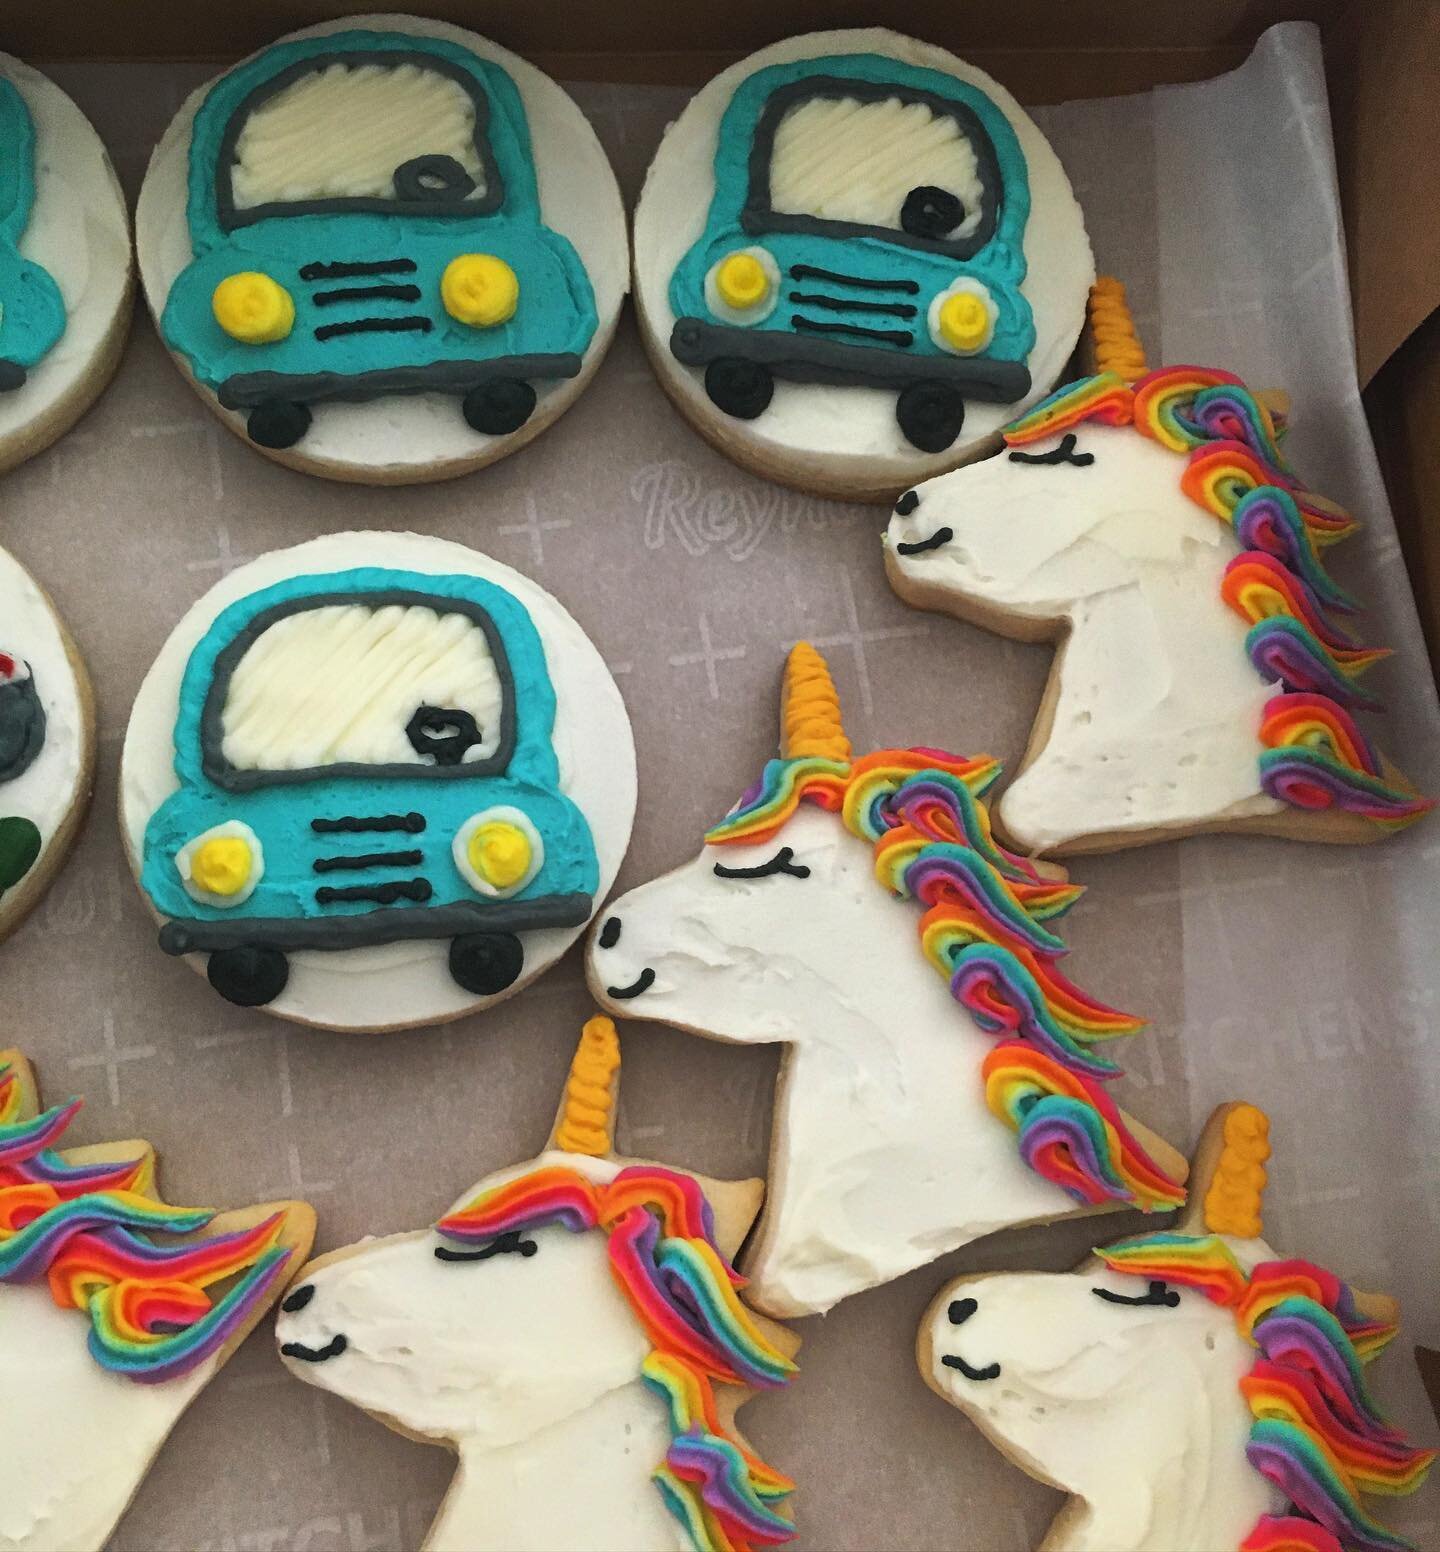 Buttercream Cars &amp; Unicorns for a super cute dual birthday celebration! 
🌈🦄✨🚙🚘
.
.
#buttercreamcookies #birthdaycookies #unicorncookies #carcookies #homebaker #cottagefoodbaker